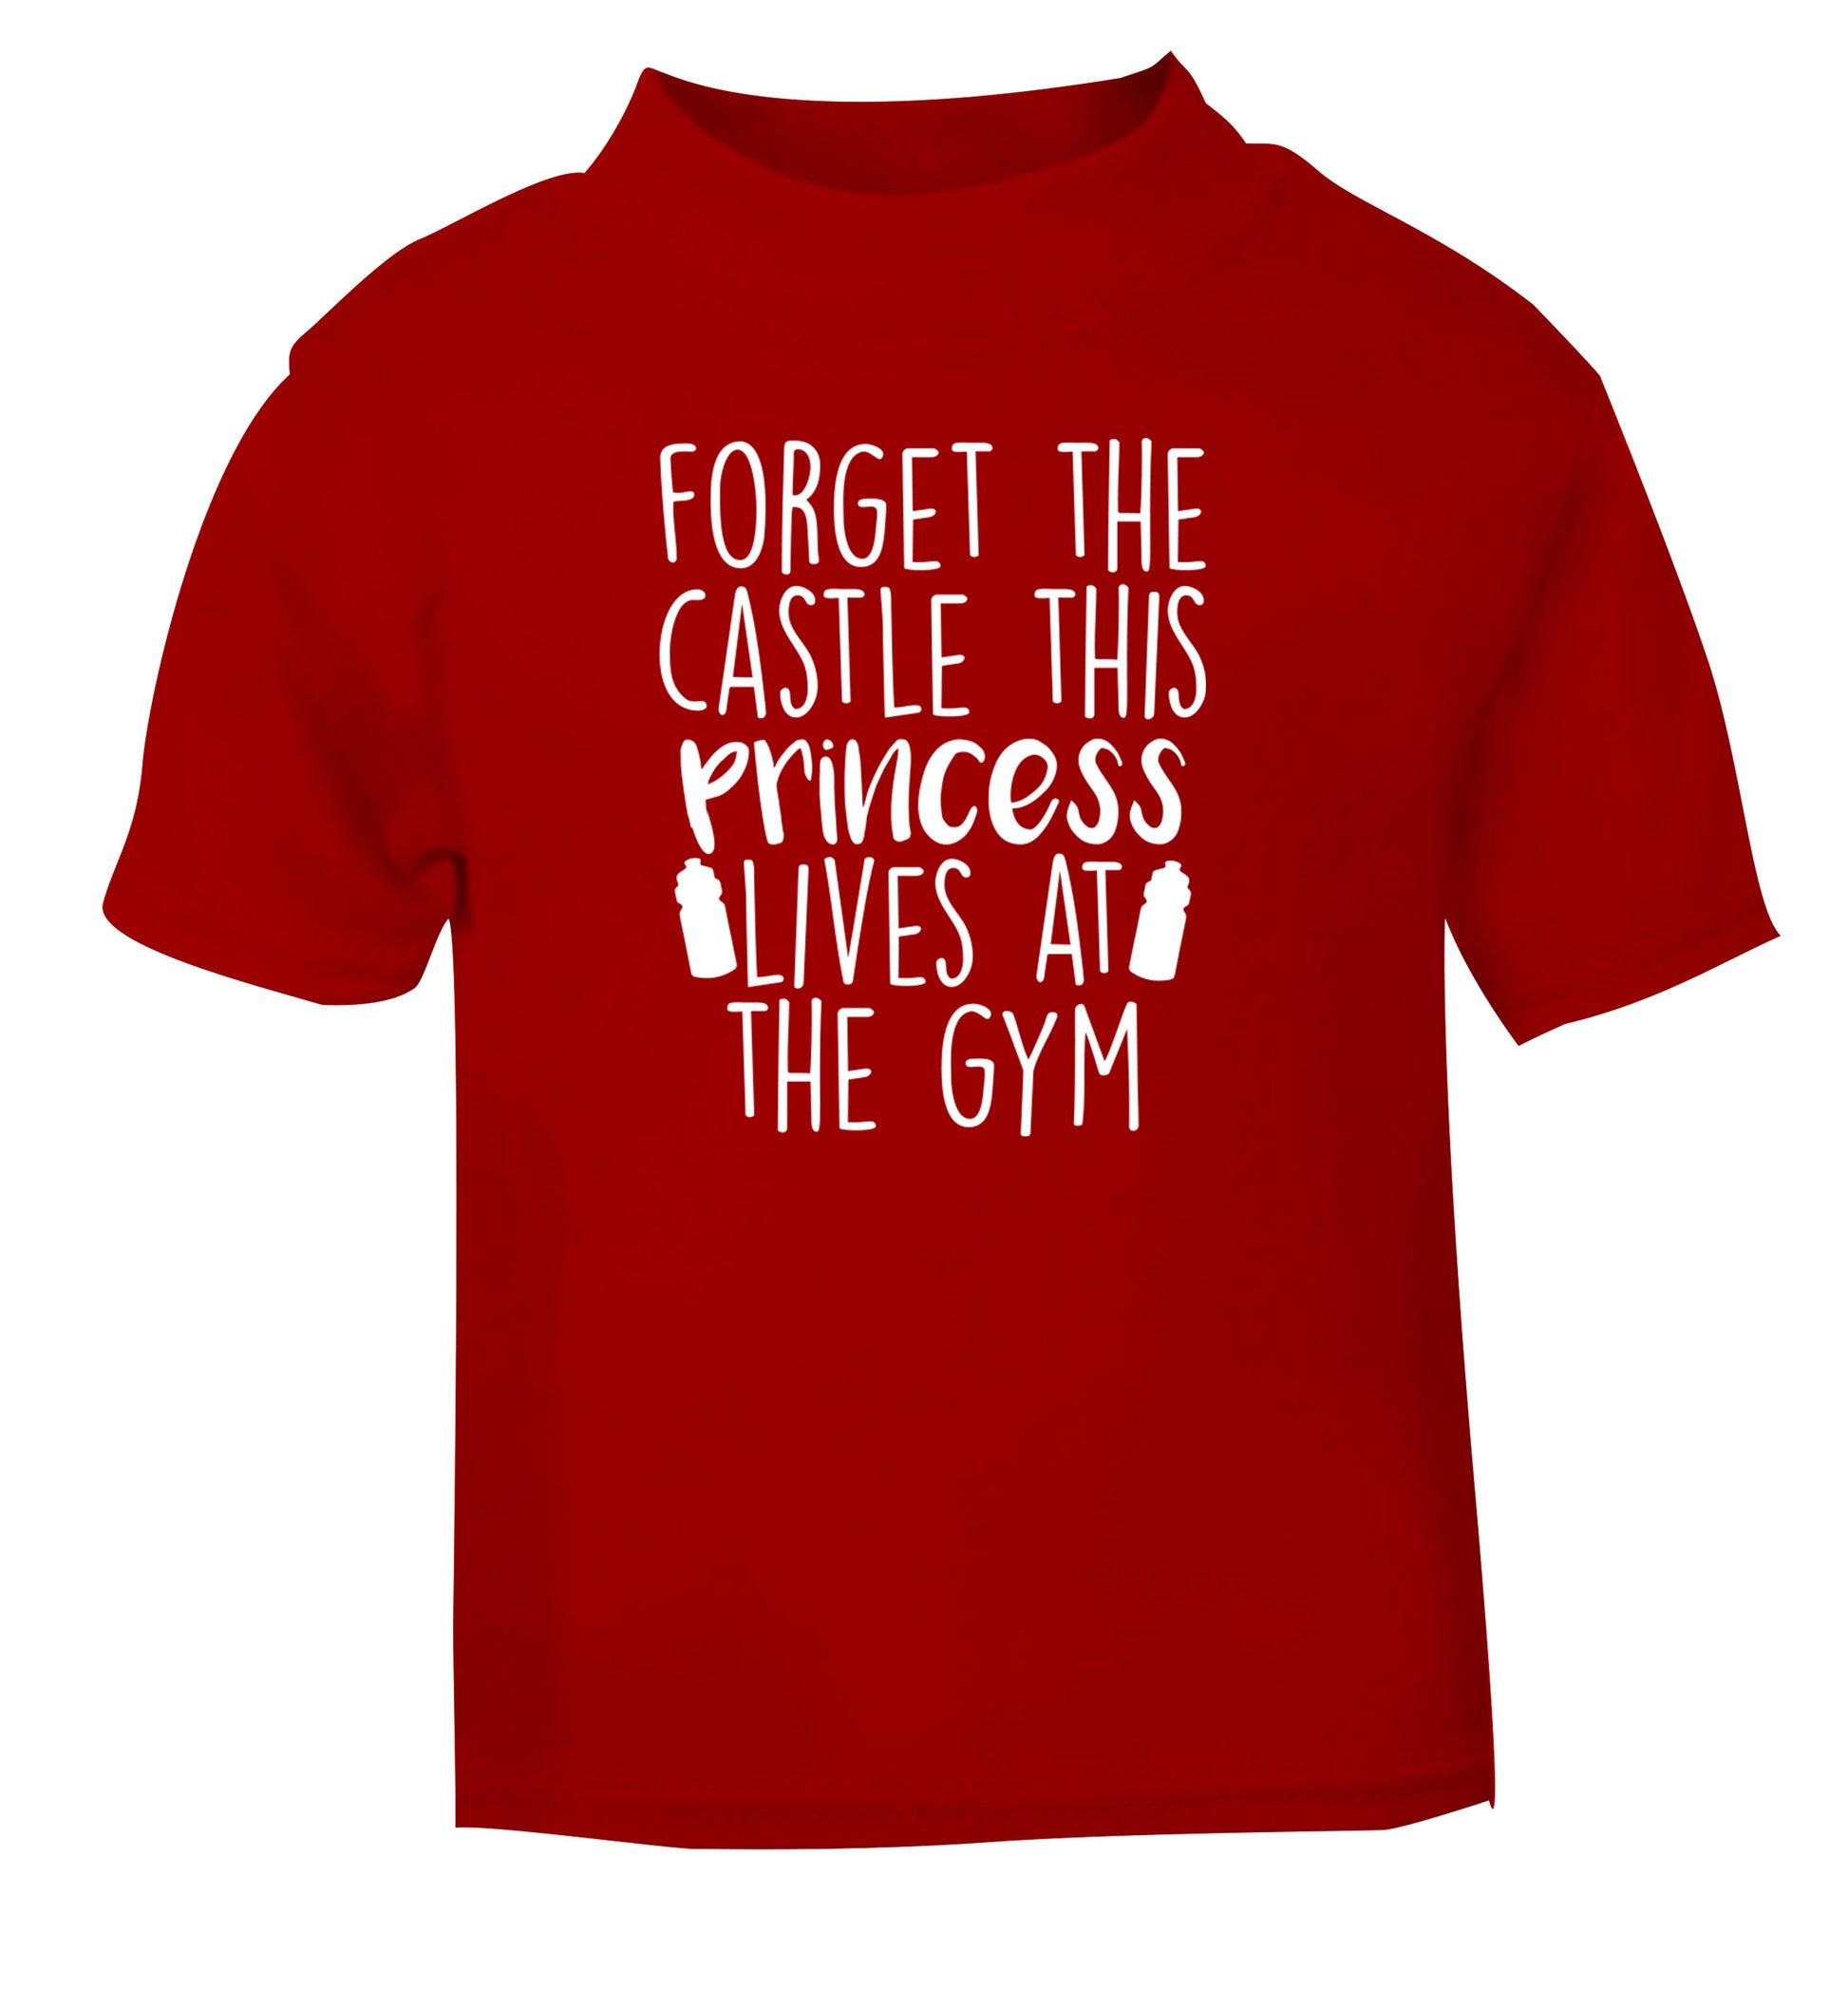 Forget the castle this princess lives at the gym red Baby Toddler Tshirt 2 Years